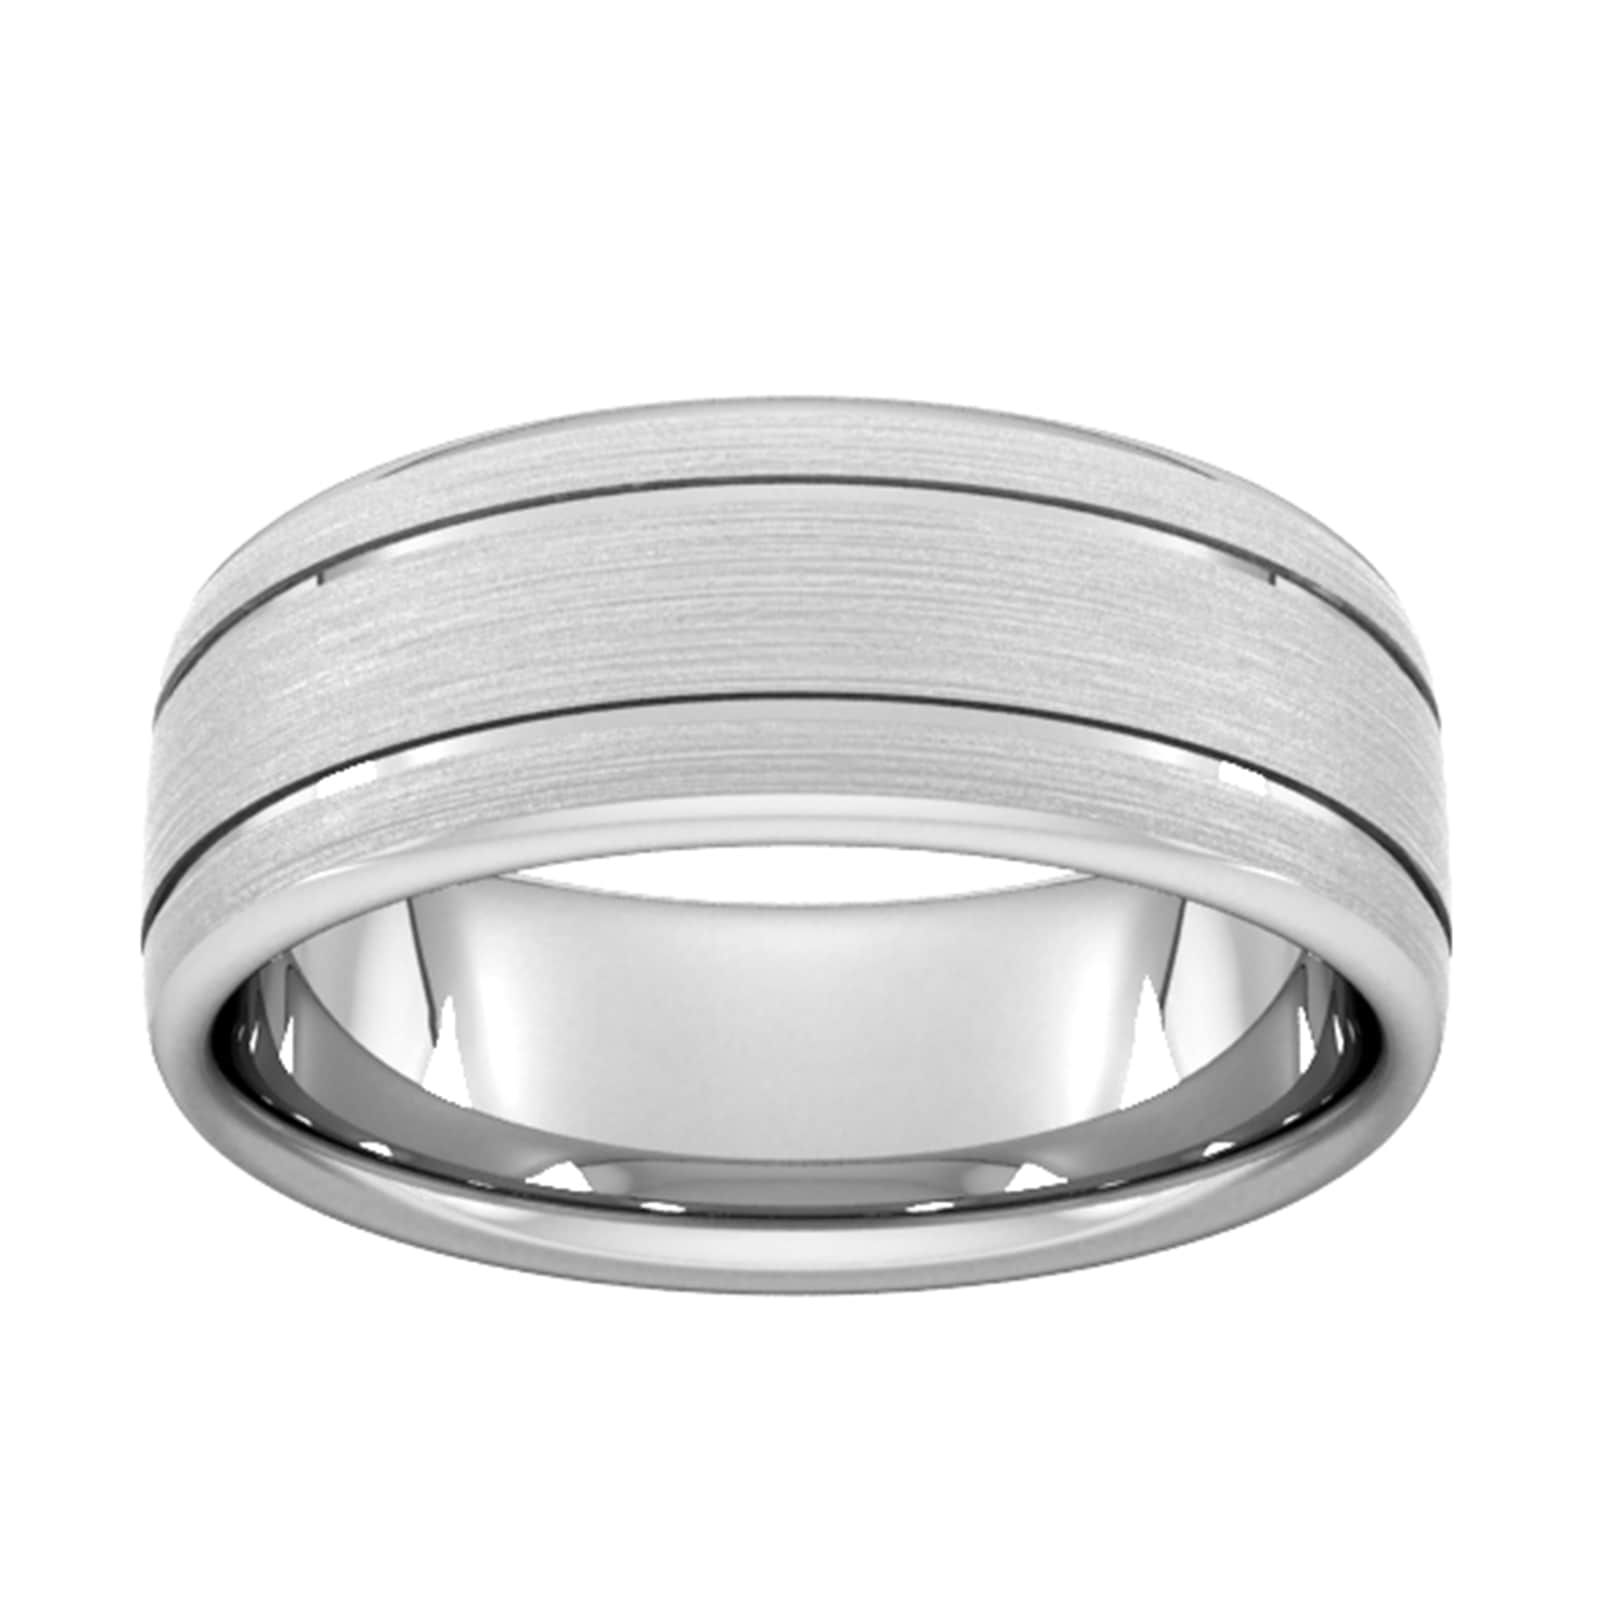 8mm Slight Court Standard Matt Finish With Double Grooves Wedding Ring In 18 Carat White Gold - Ring Size W